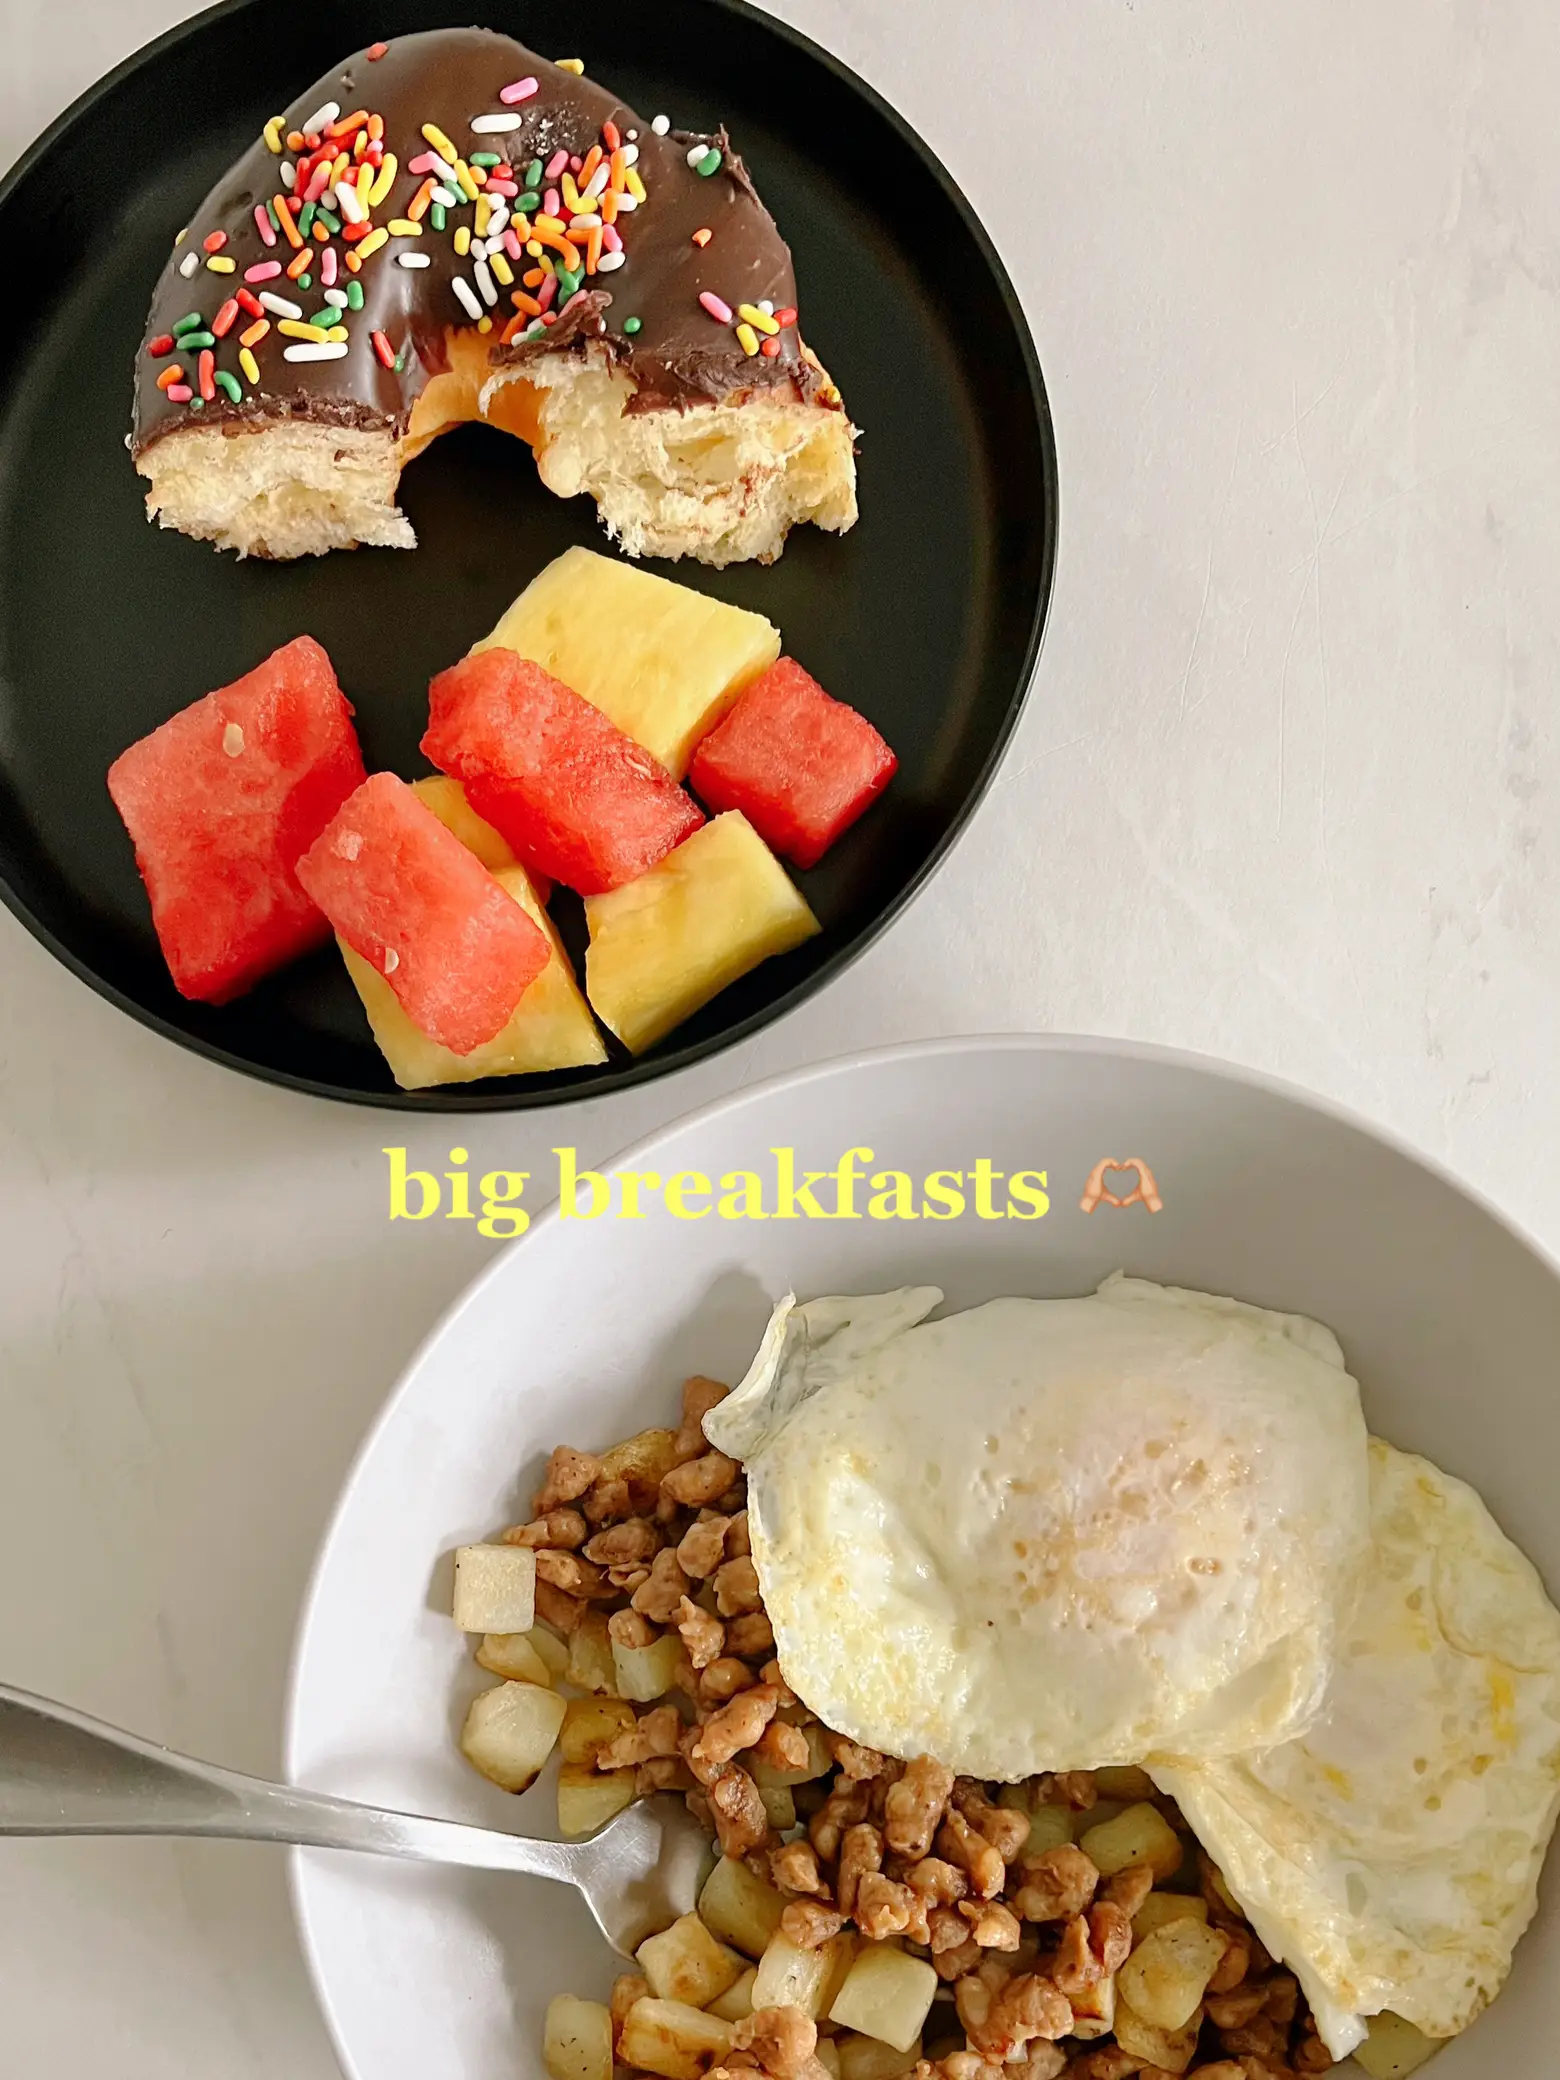 favorite ✨basic✨ breakfasts 's images(3)